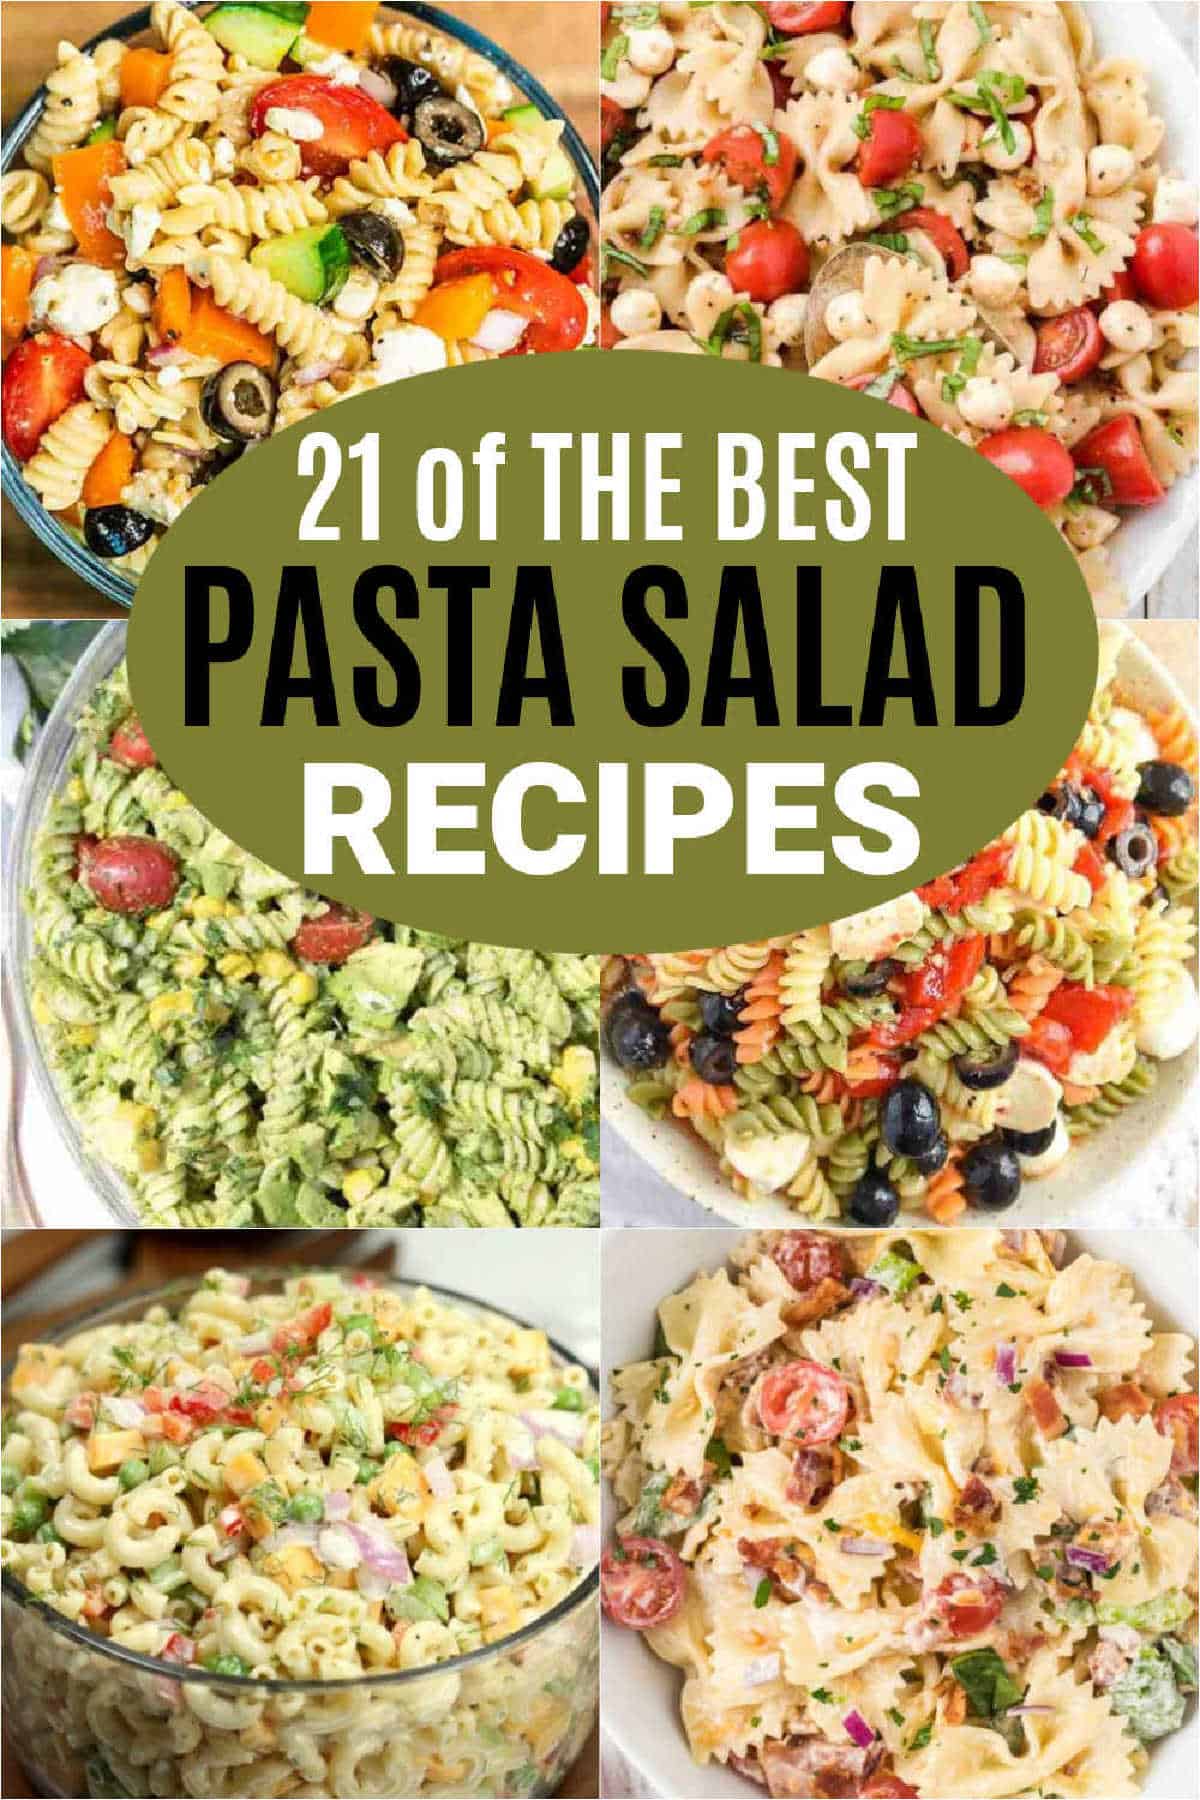 These easy and delicious cold pasta salad recipes are easy to make and taste amazing too. Choose from tons of varieties that are delicious. You will love this classic, creamy and ranch based pasta salad recipes.  You find one that you and your family will love.  #eatingonadime #sidedishes #pastasalads 
